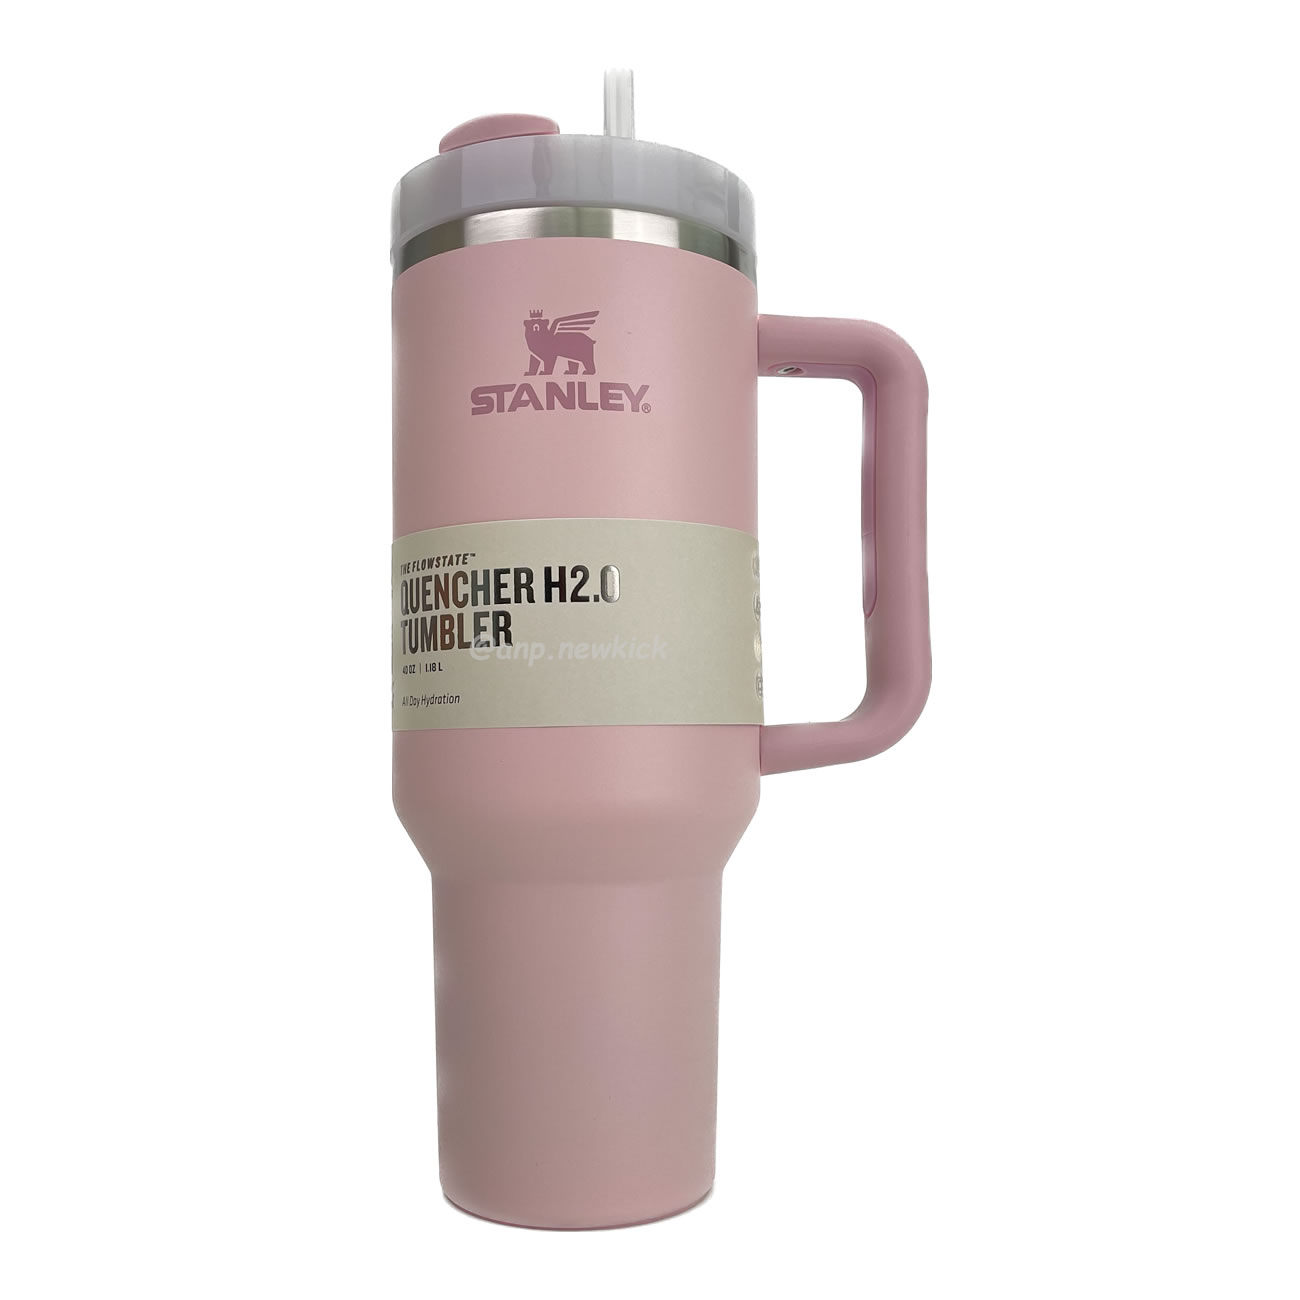 Stanley The Quencher H2.0 Flowstate Tumbler 40 Oz (9) - newkick.org